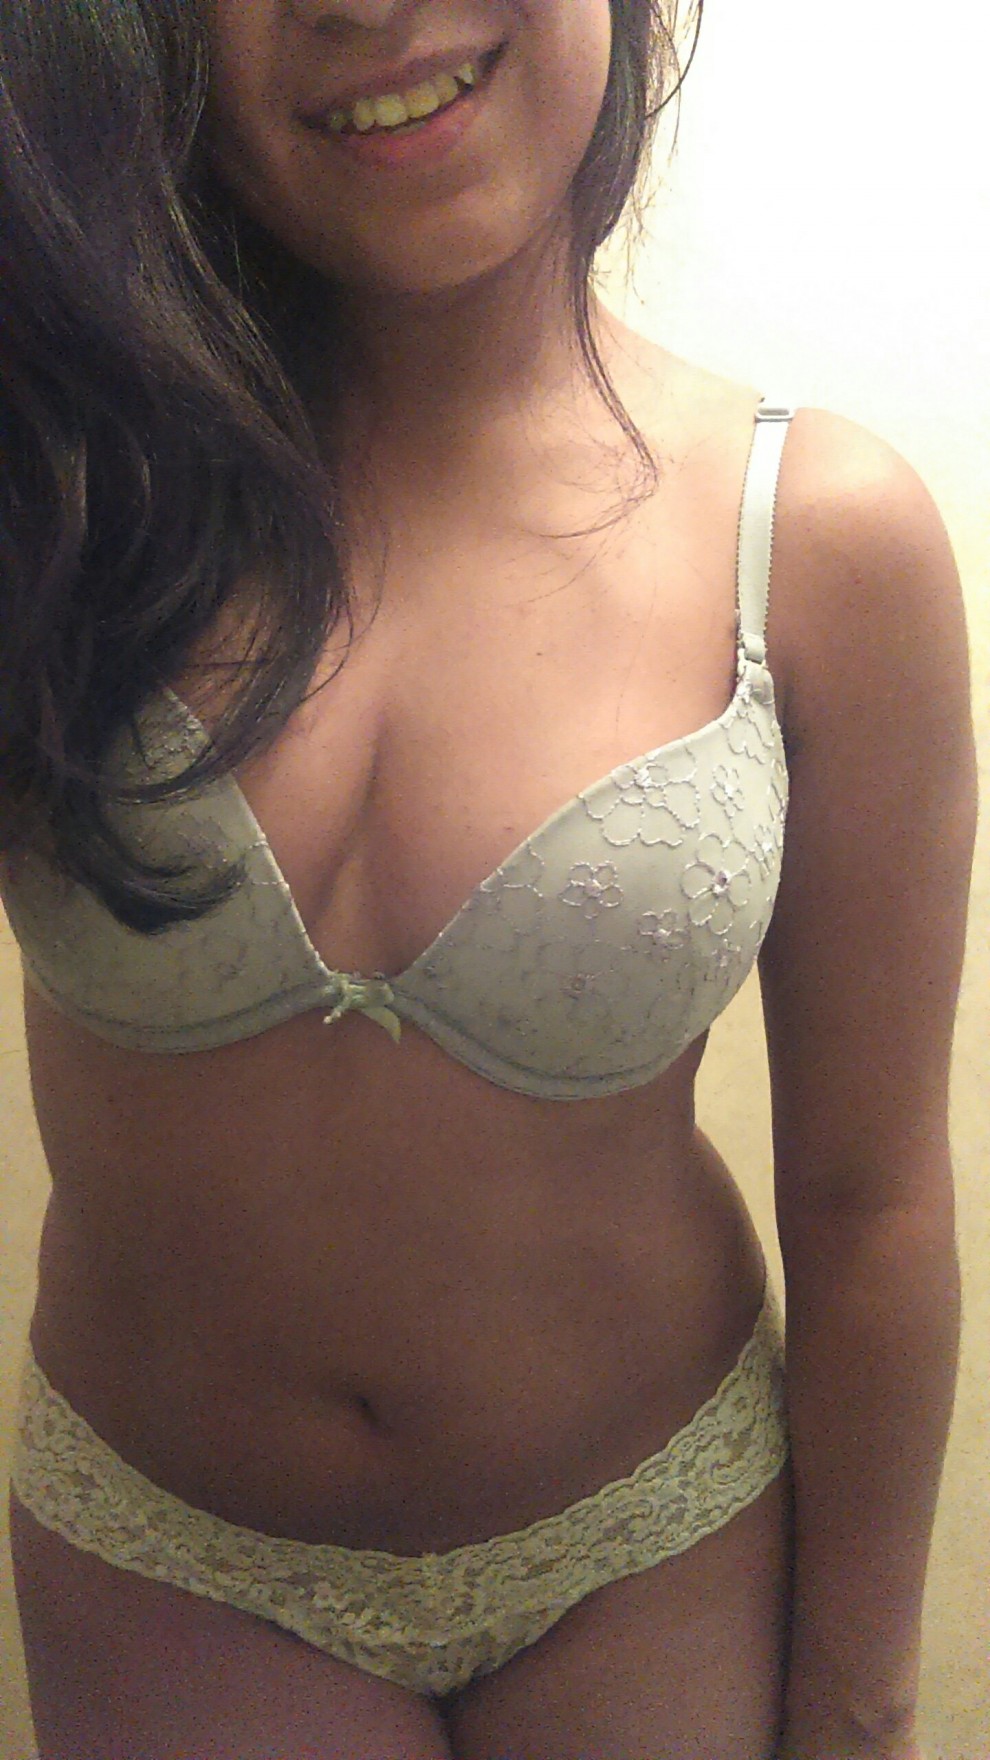 [F]eeling a little show-offy today! Happy Saturday.